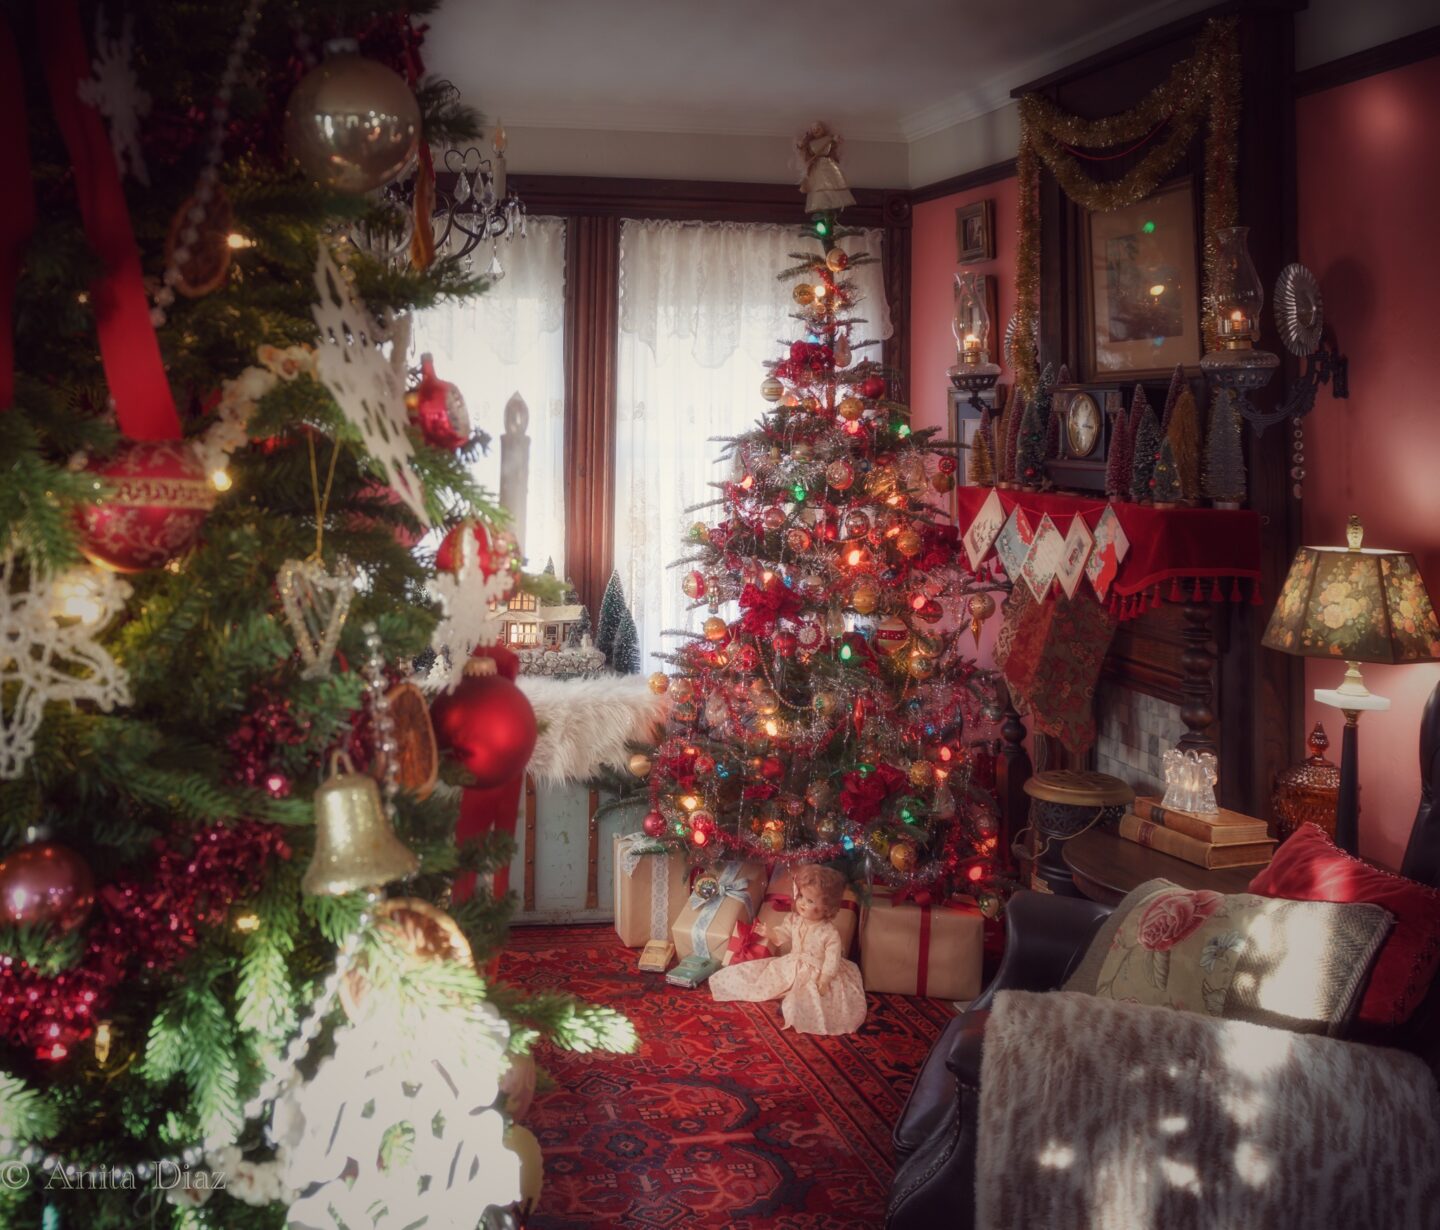 A Vintage 1930s-inspired Christmas